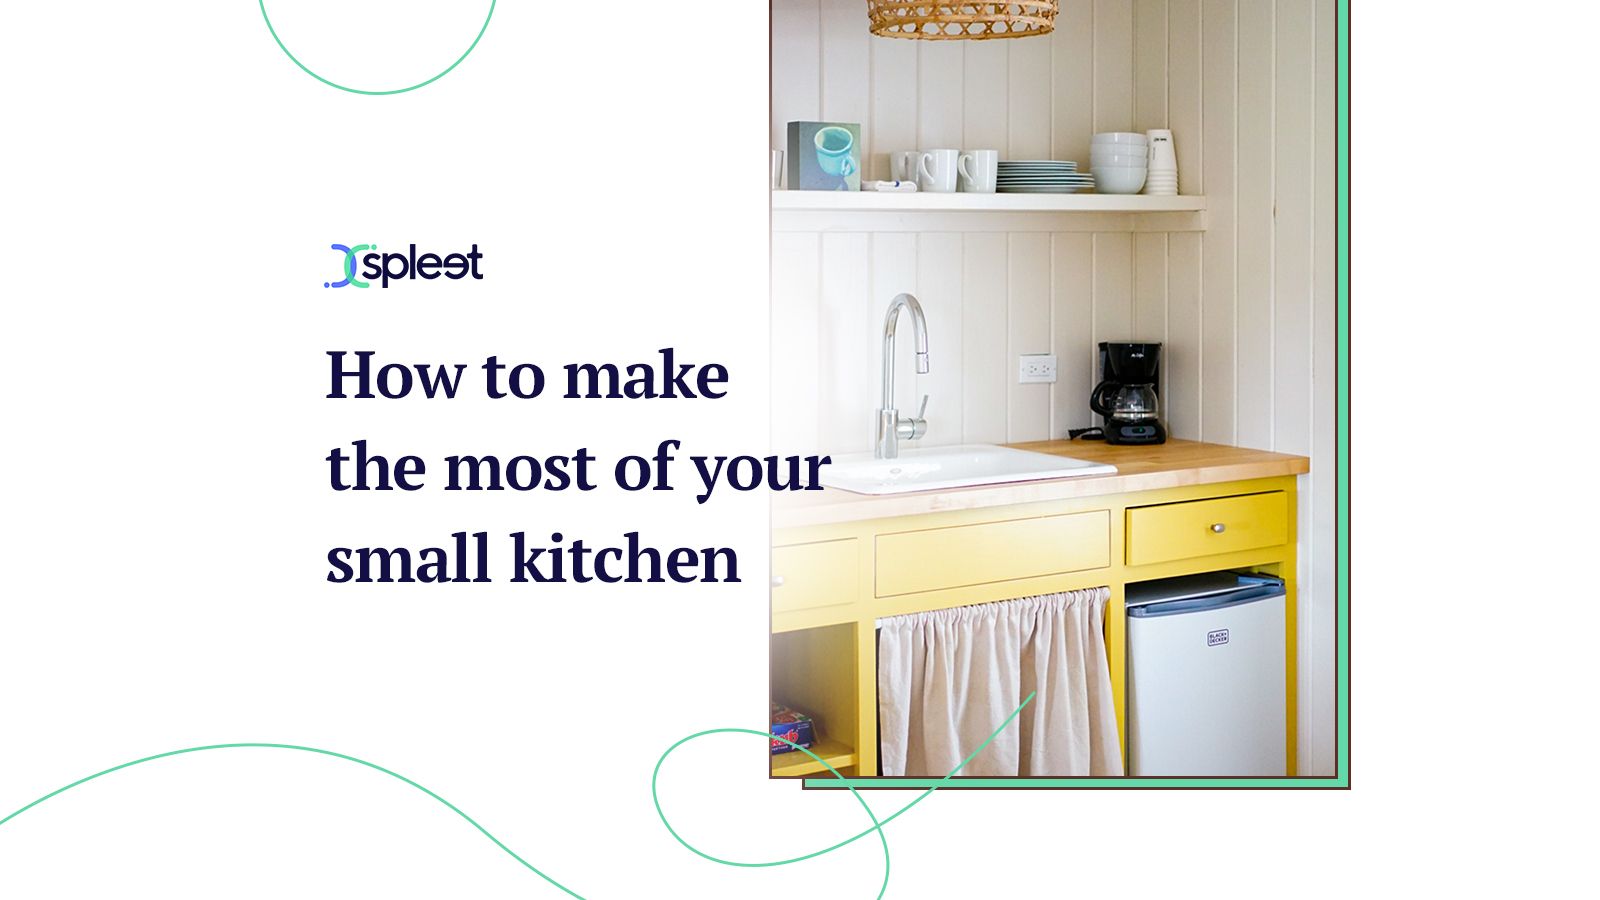 How to make the most of your small kitchen